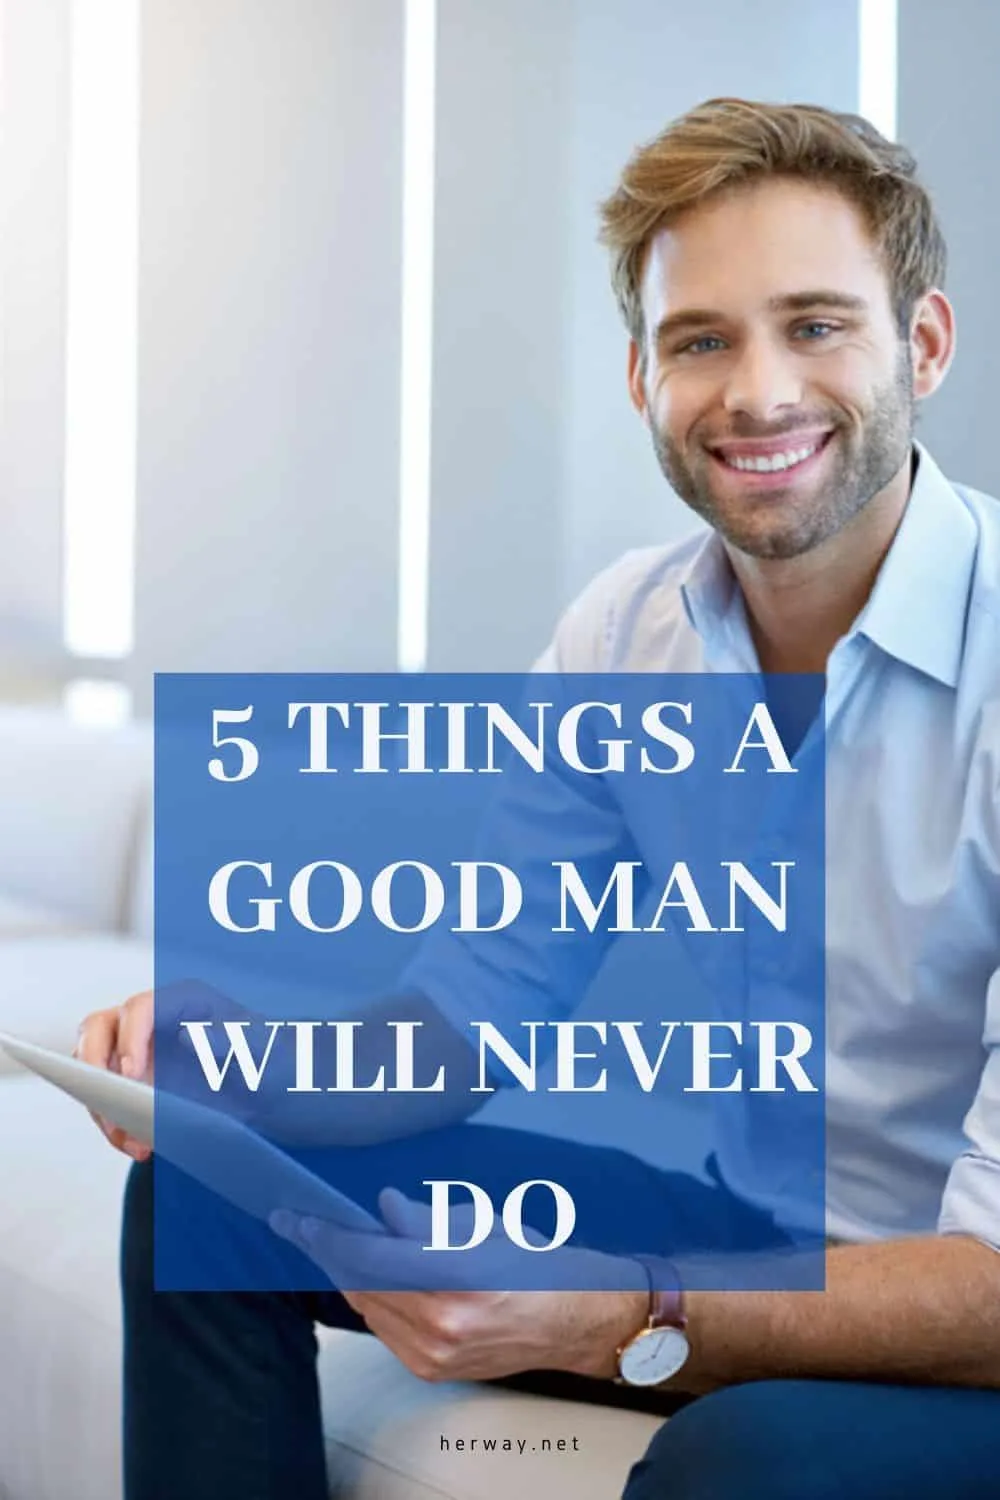 5 Things A Good Man Will Never Do